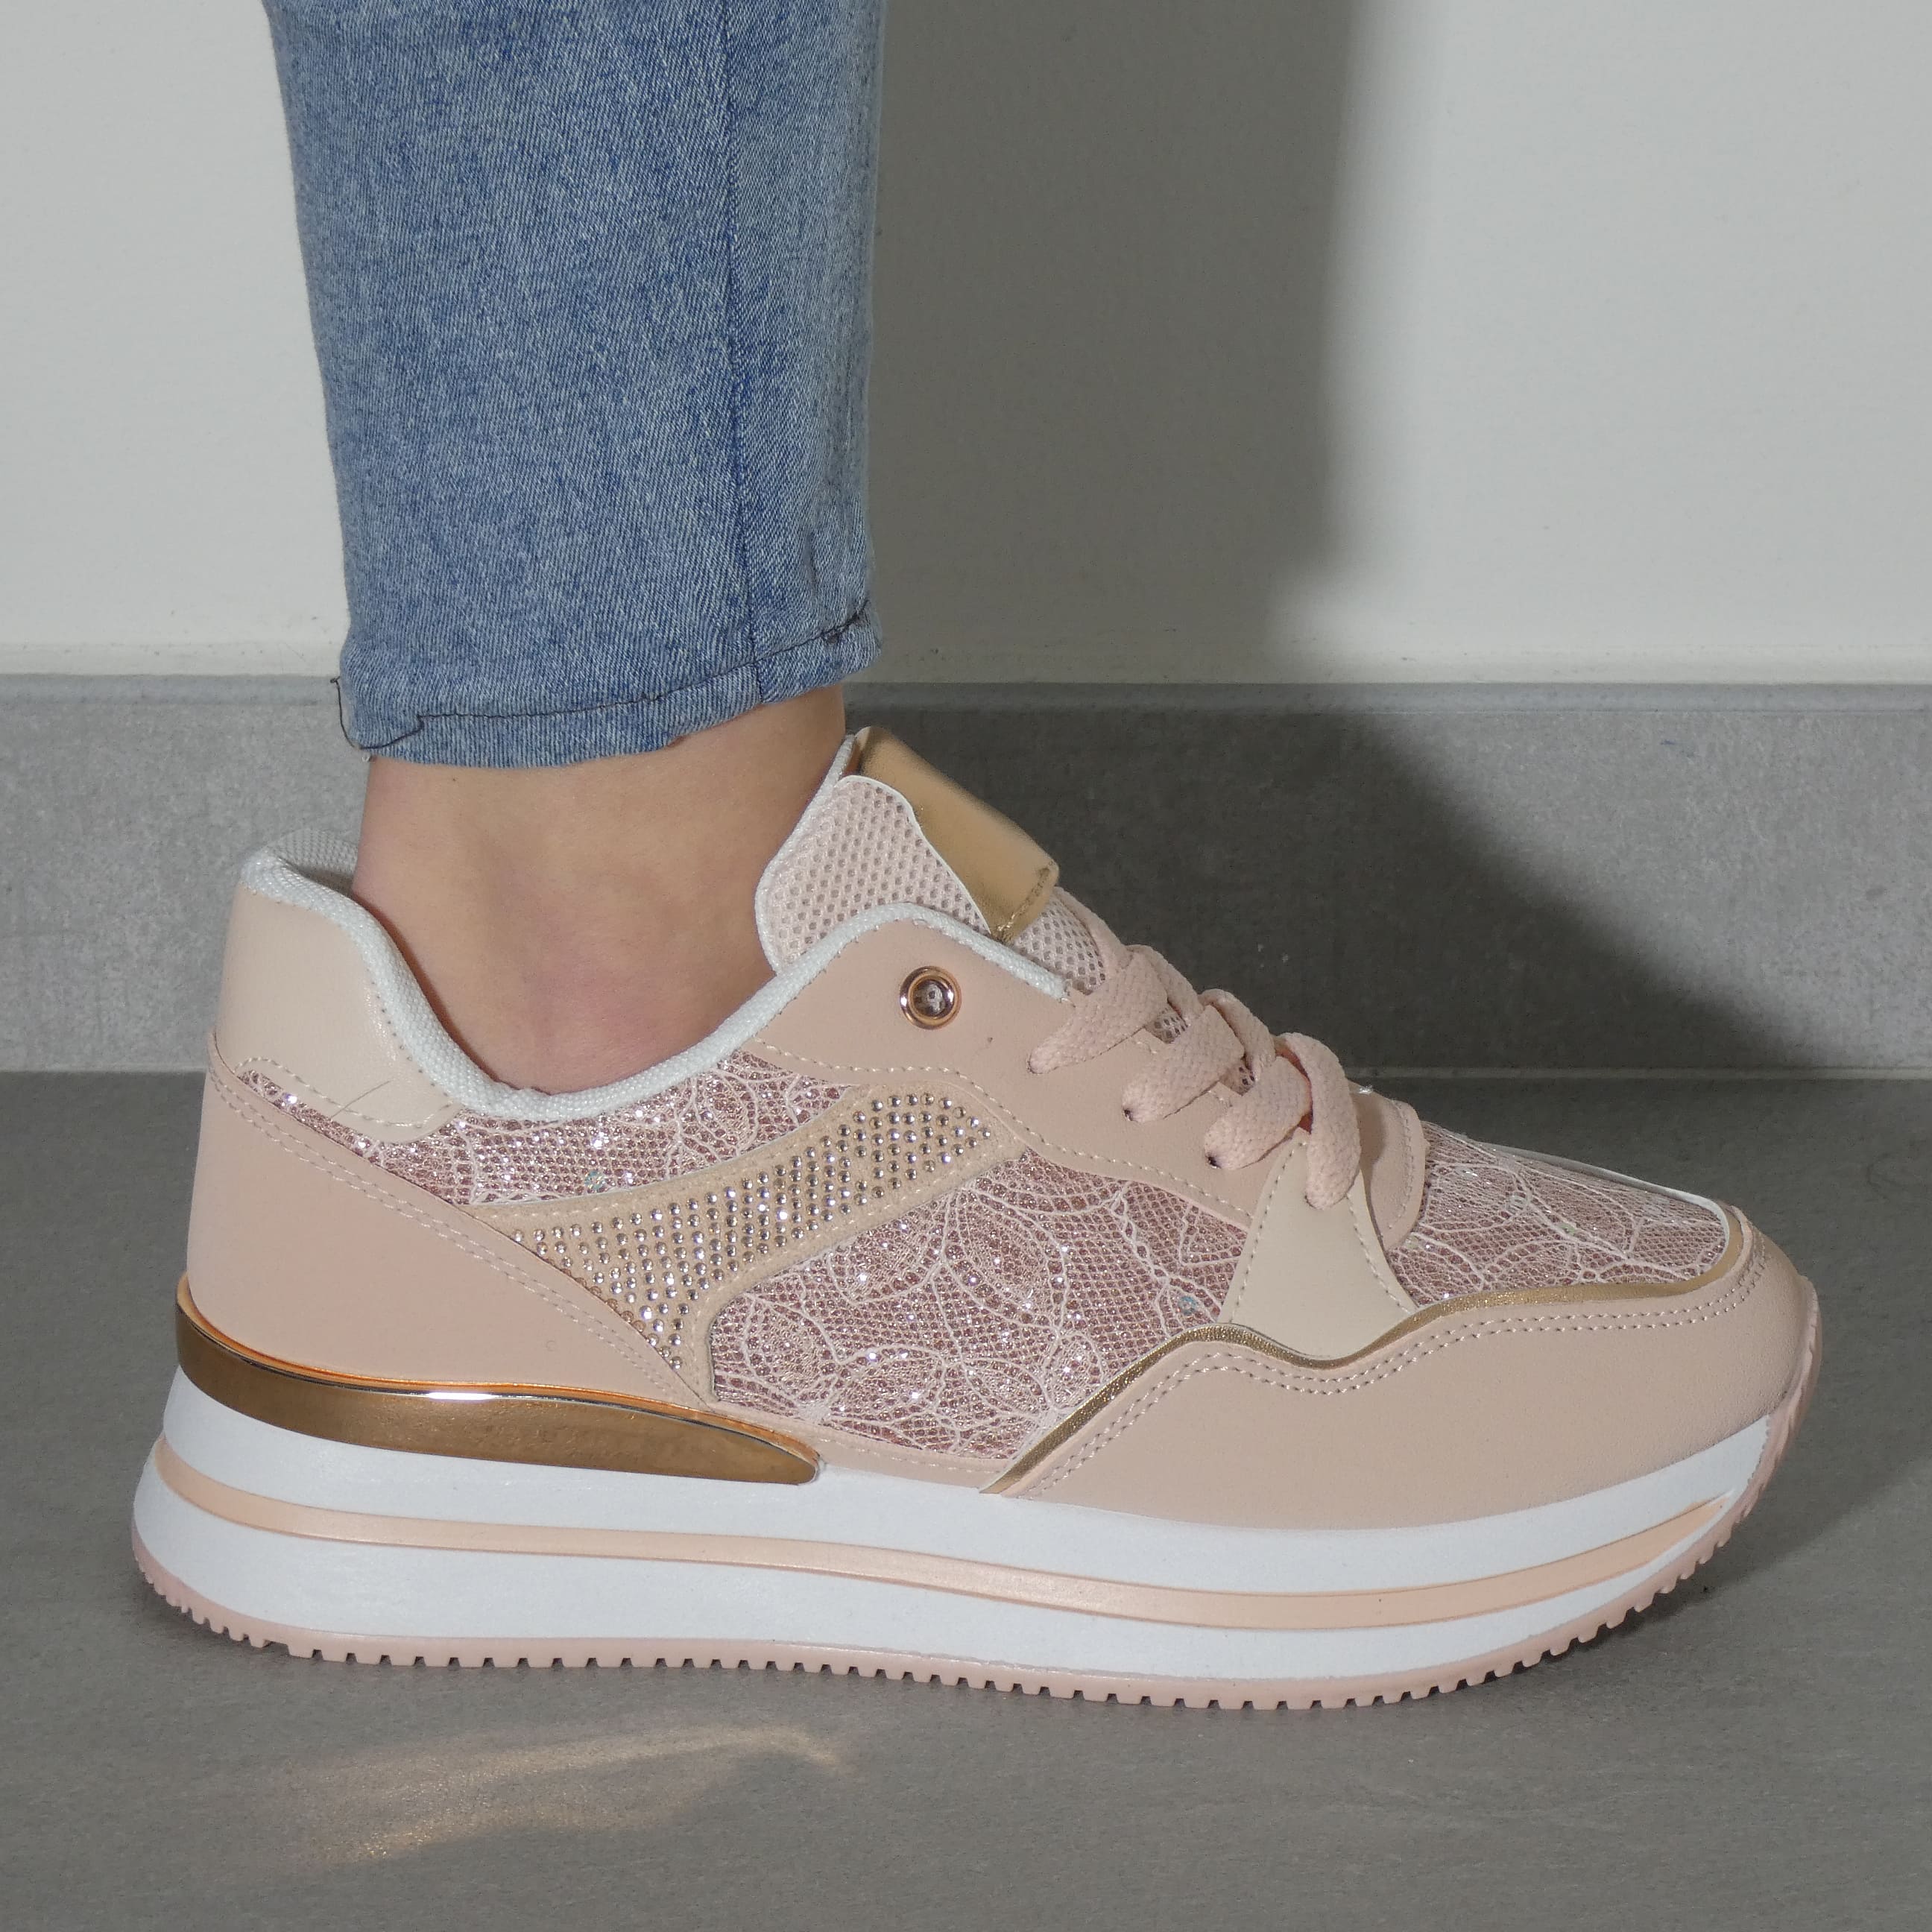 Gianna - Sneakers Donna NUOVA STAGIONE